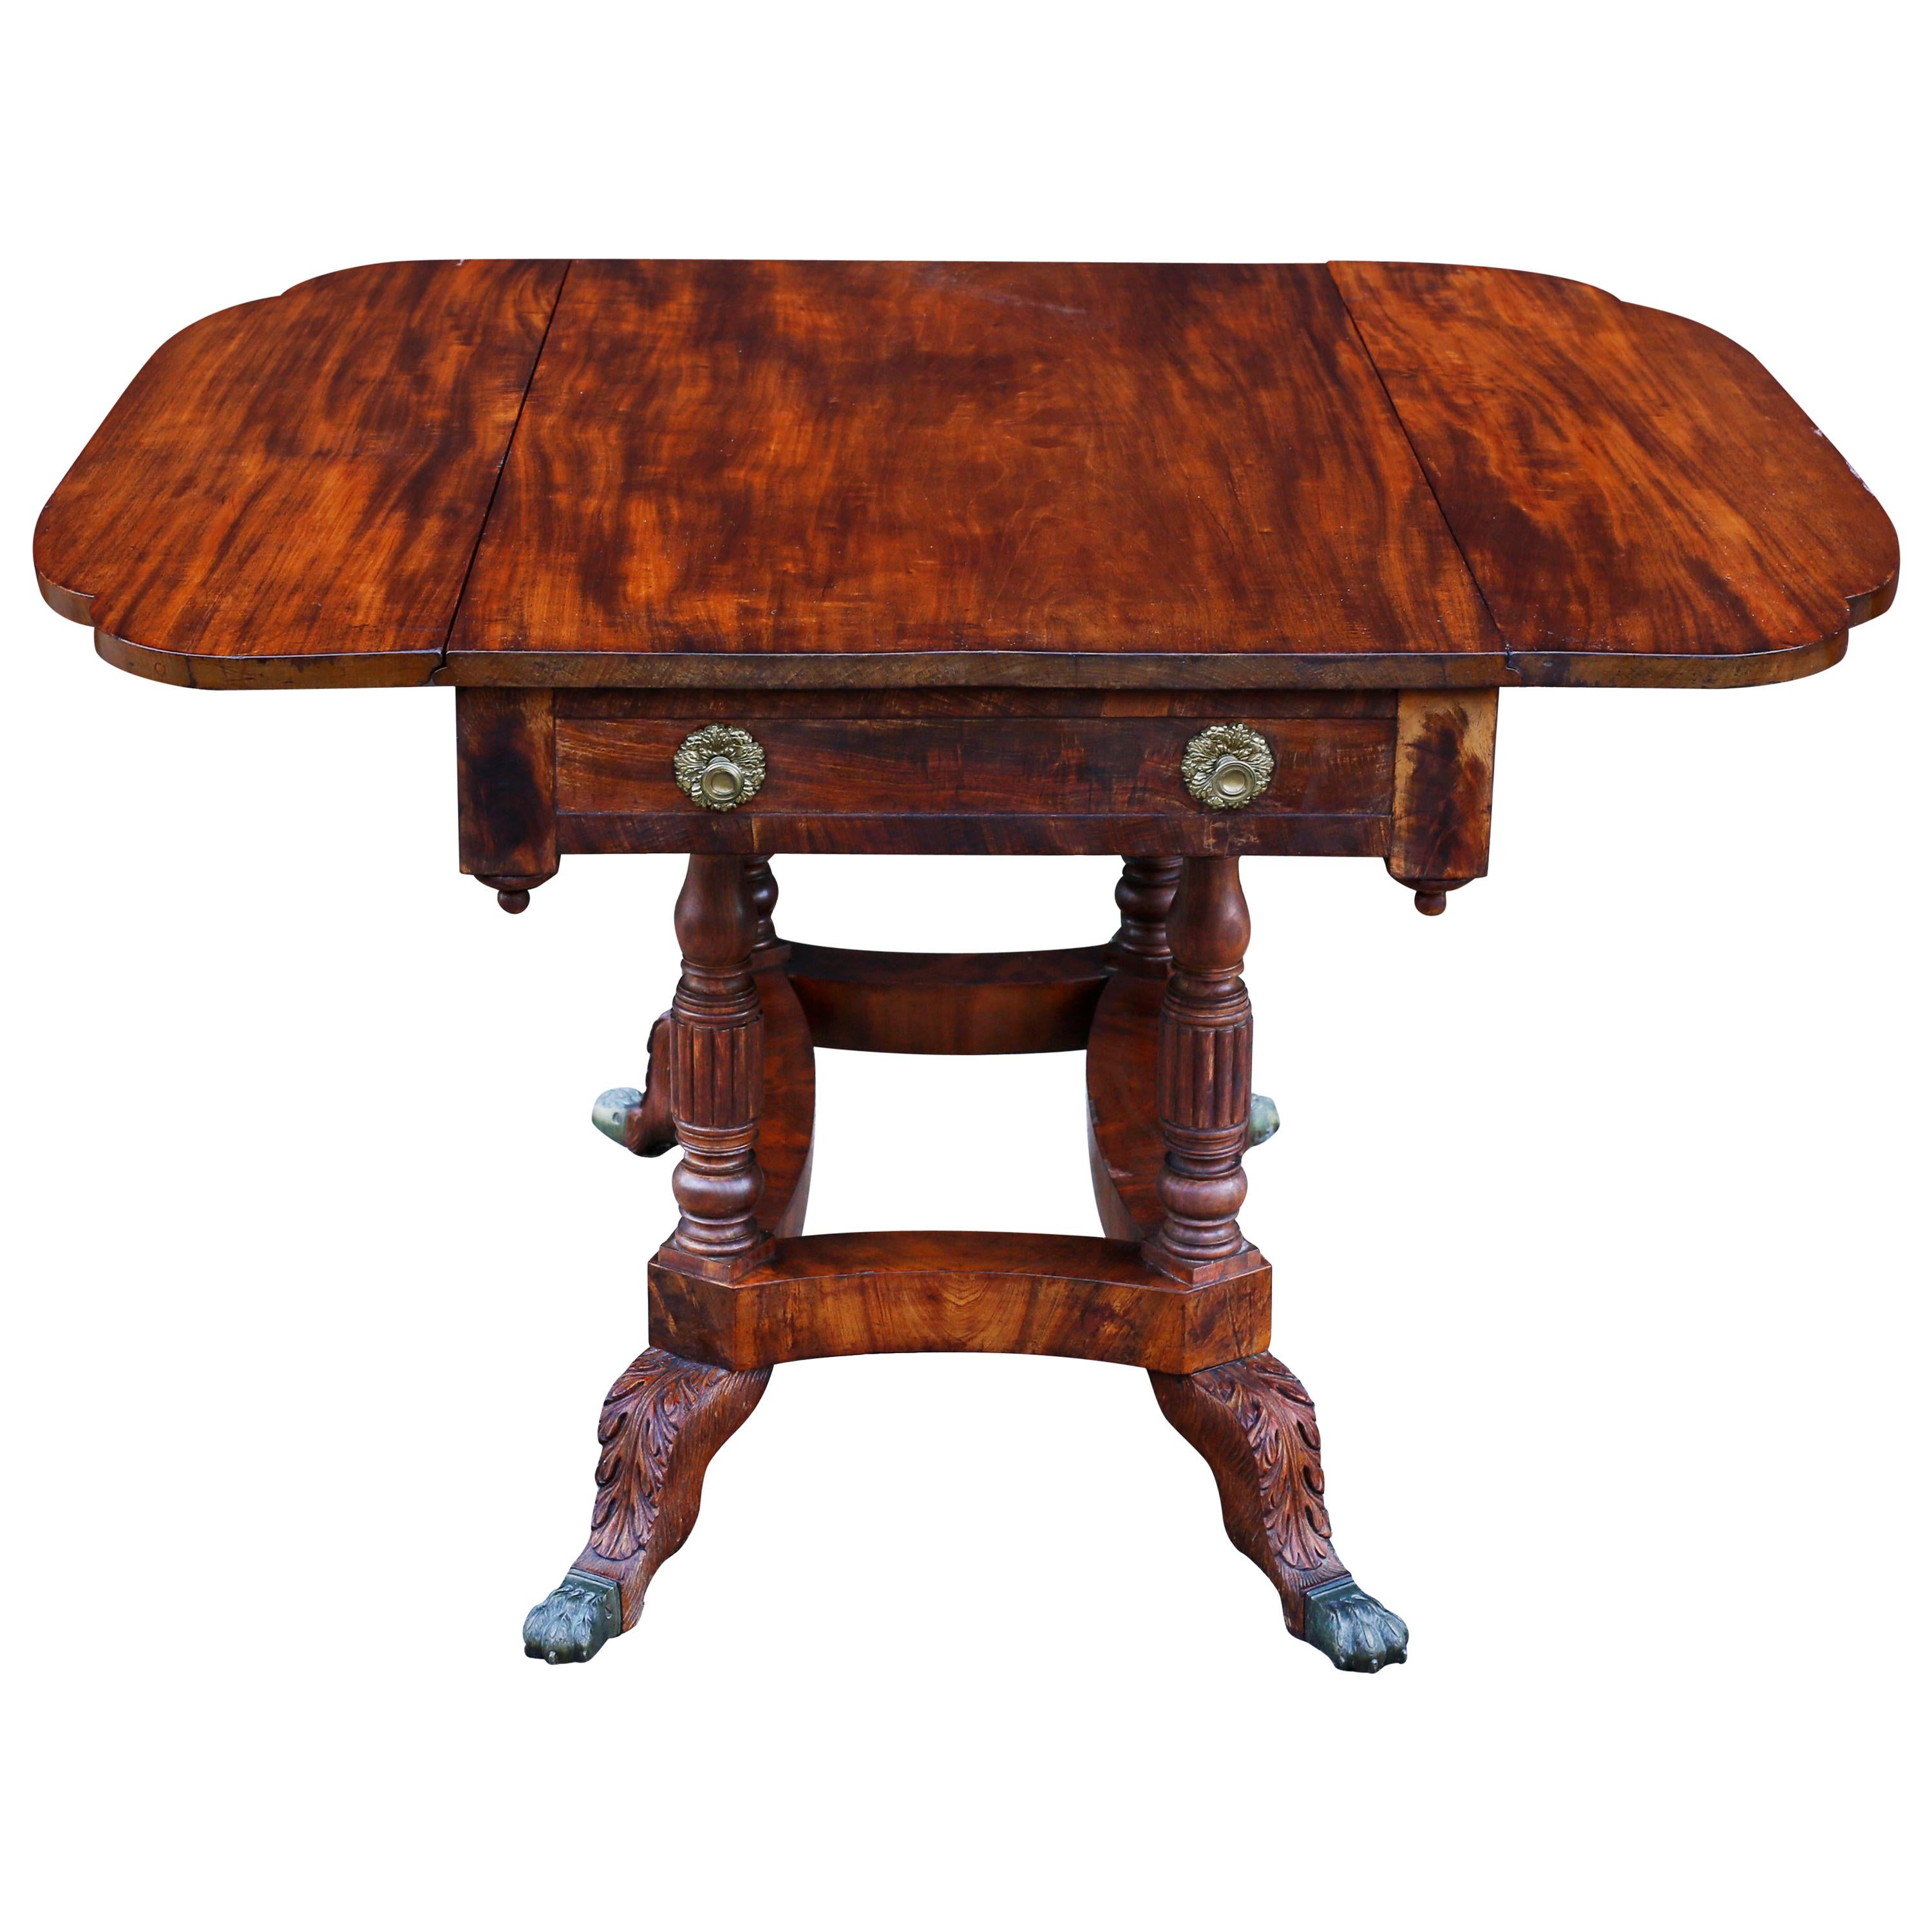 A fine New York breakfast table composed of fiddle back mahogany and exhibiting masterful carving. The Pembroke table has one drawer with original brass ormolu pulls and a matching false drawer opposite. The scalloped edged top is supported by four